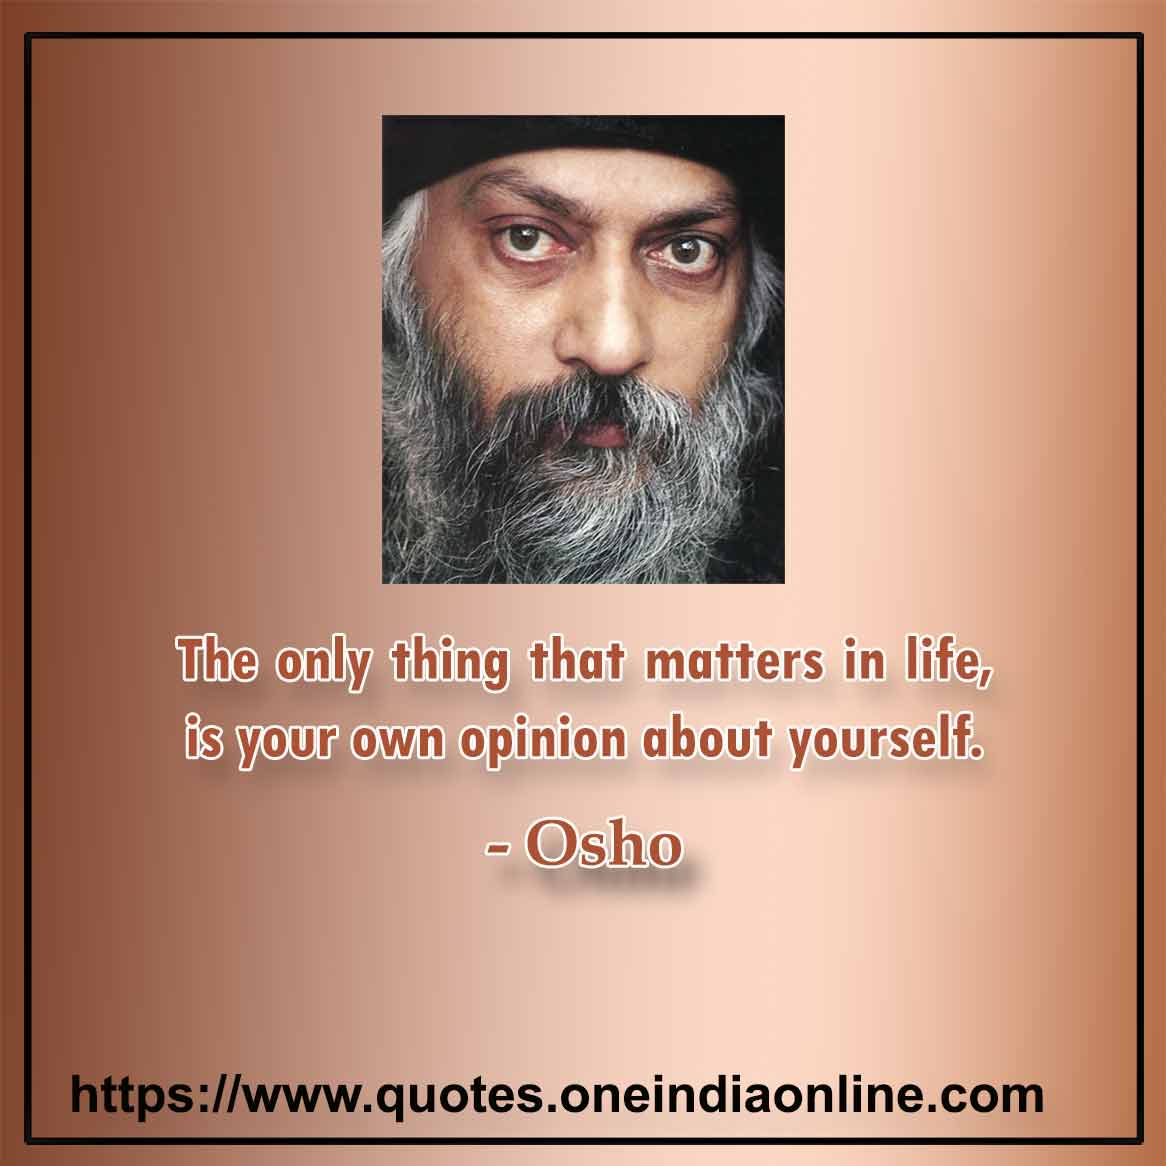 378 Osho Quotes In English Love Life Quotations Sayings